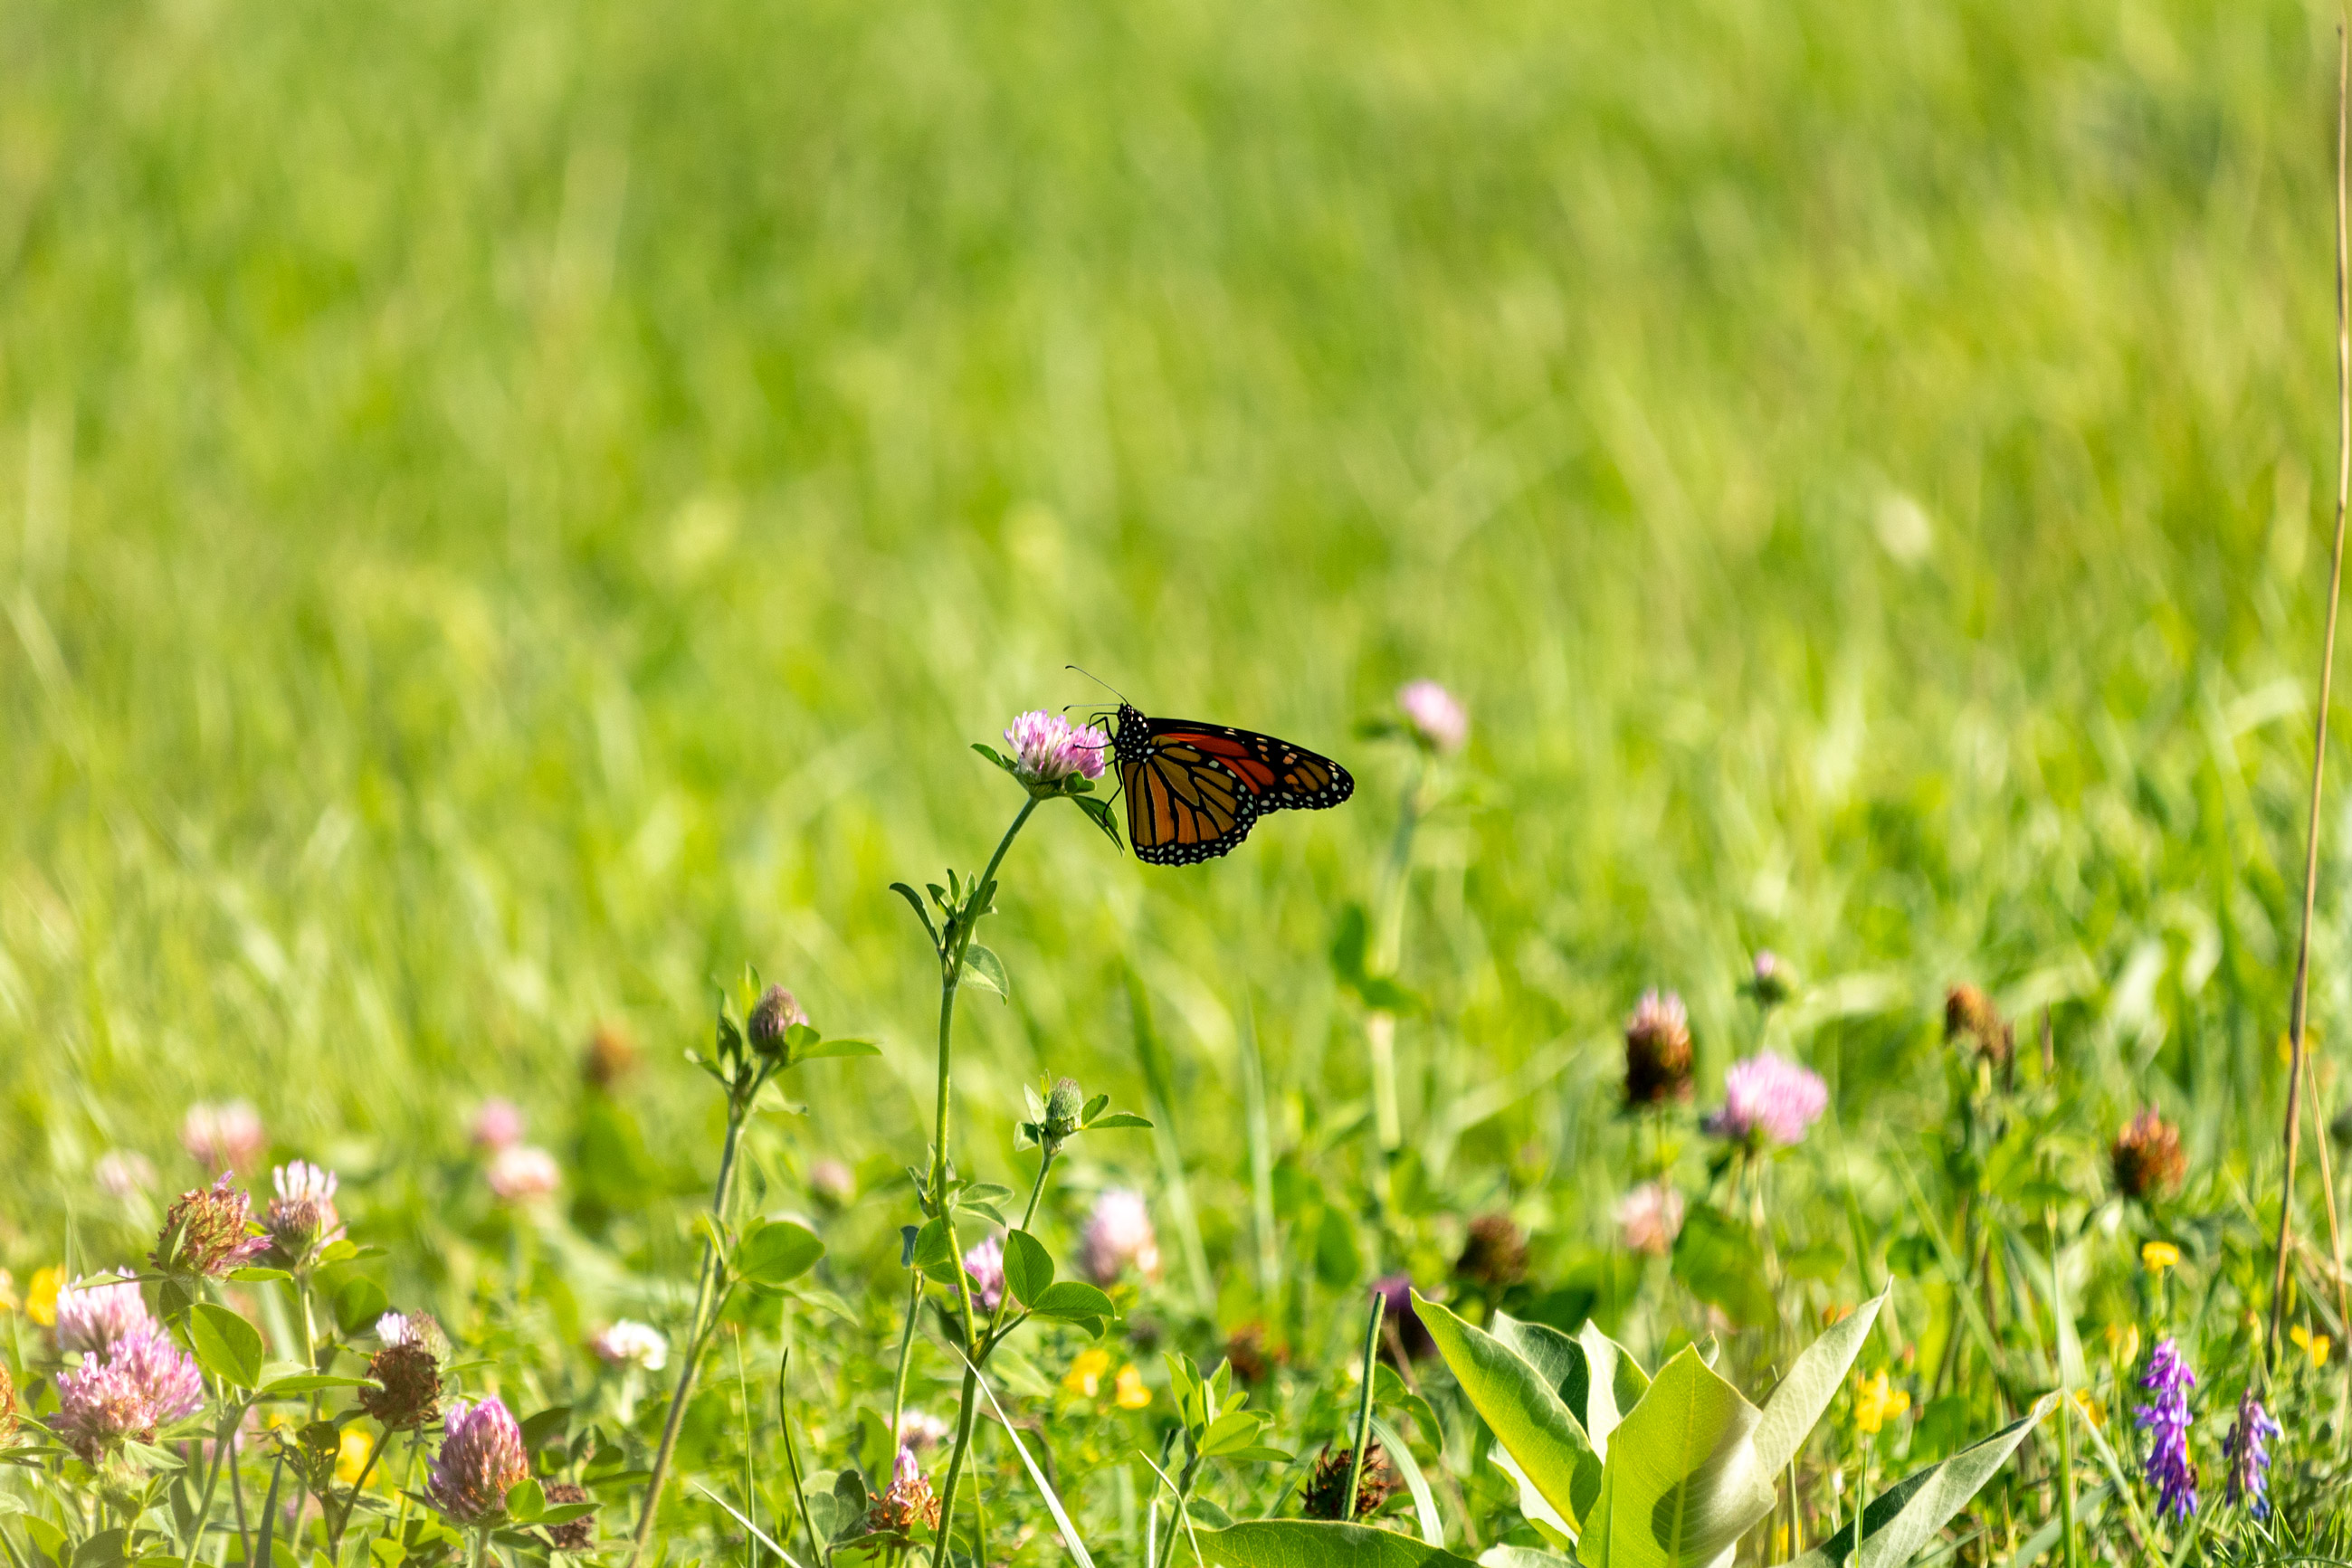 Orange and black butterfly dining at a clover blossom in a grassy field filled with wildflowers